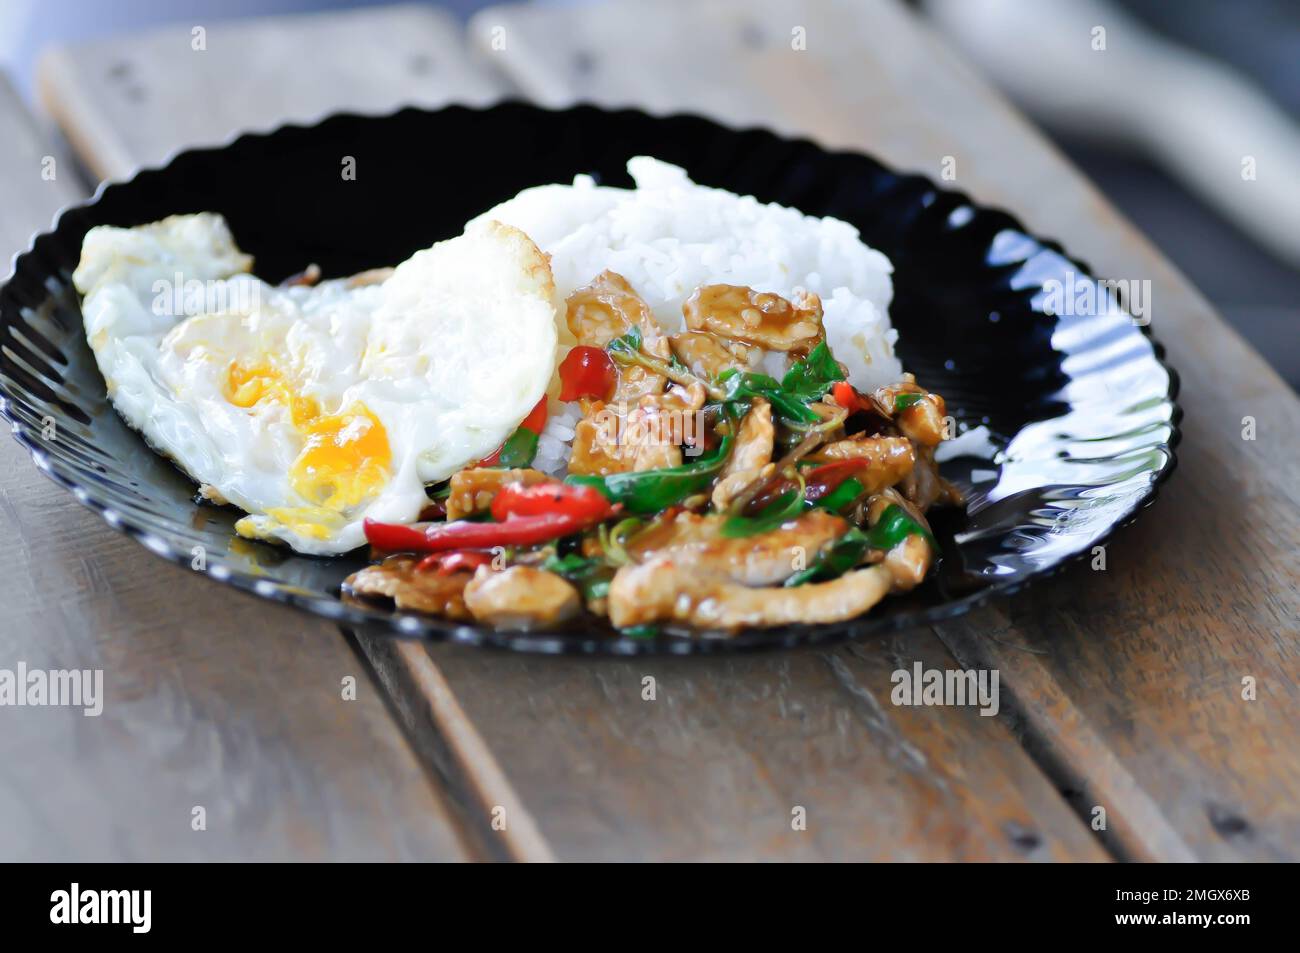 stir fried pork or stir fried pork with chili paste with rice and sunny side up egg or spicy pork Stock Photo